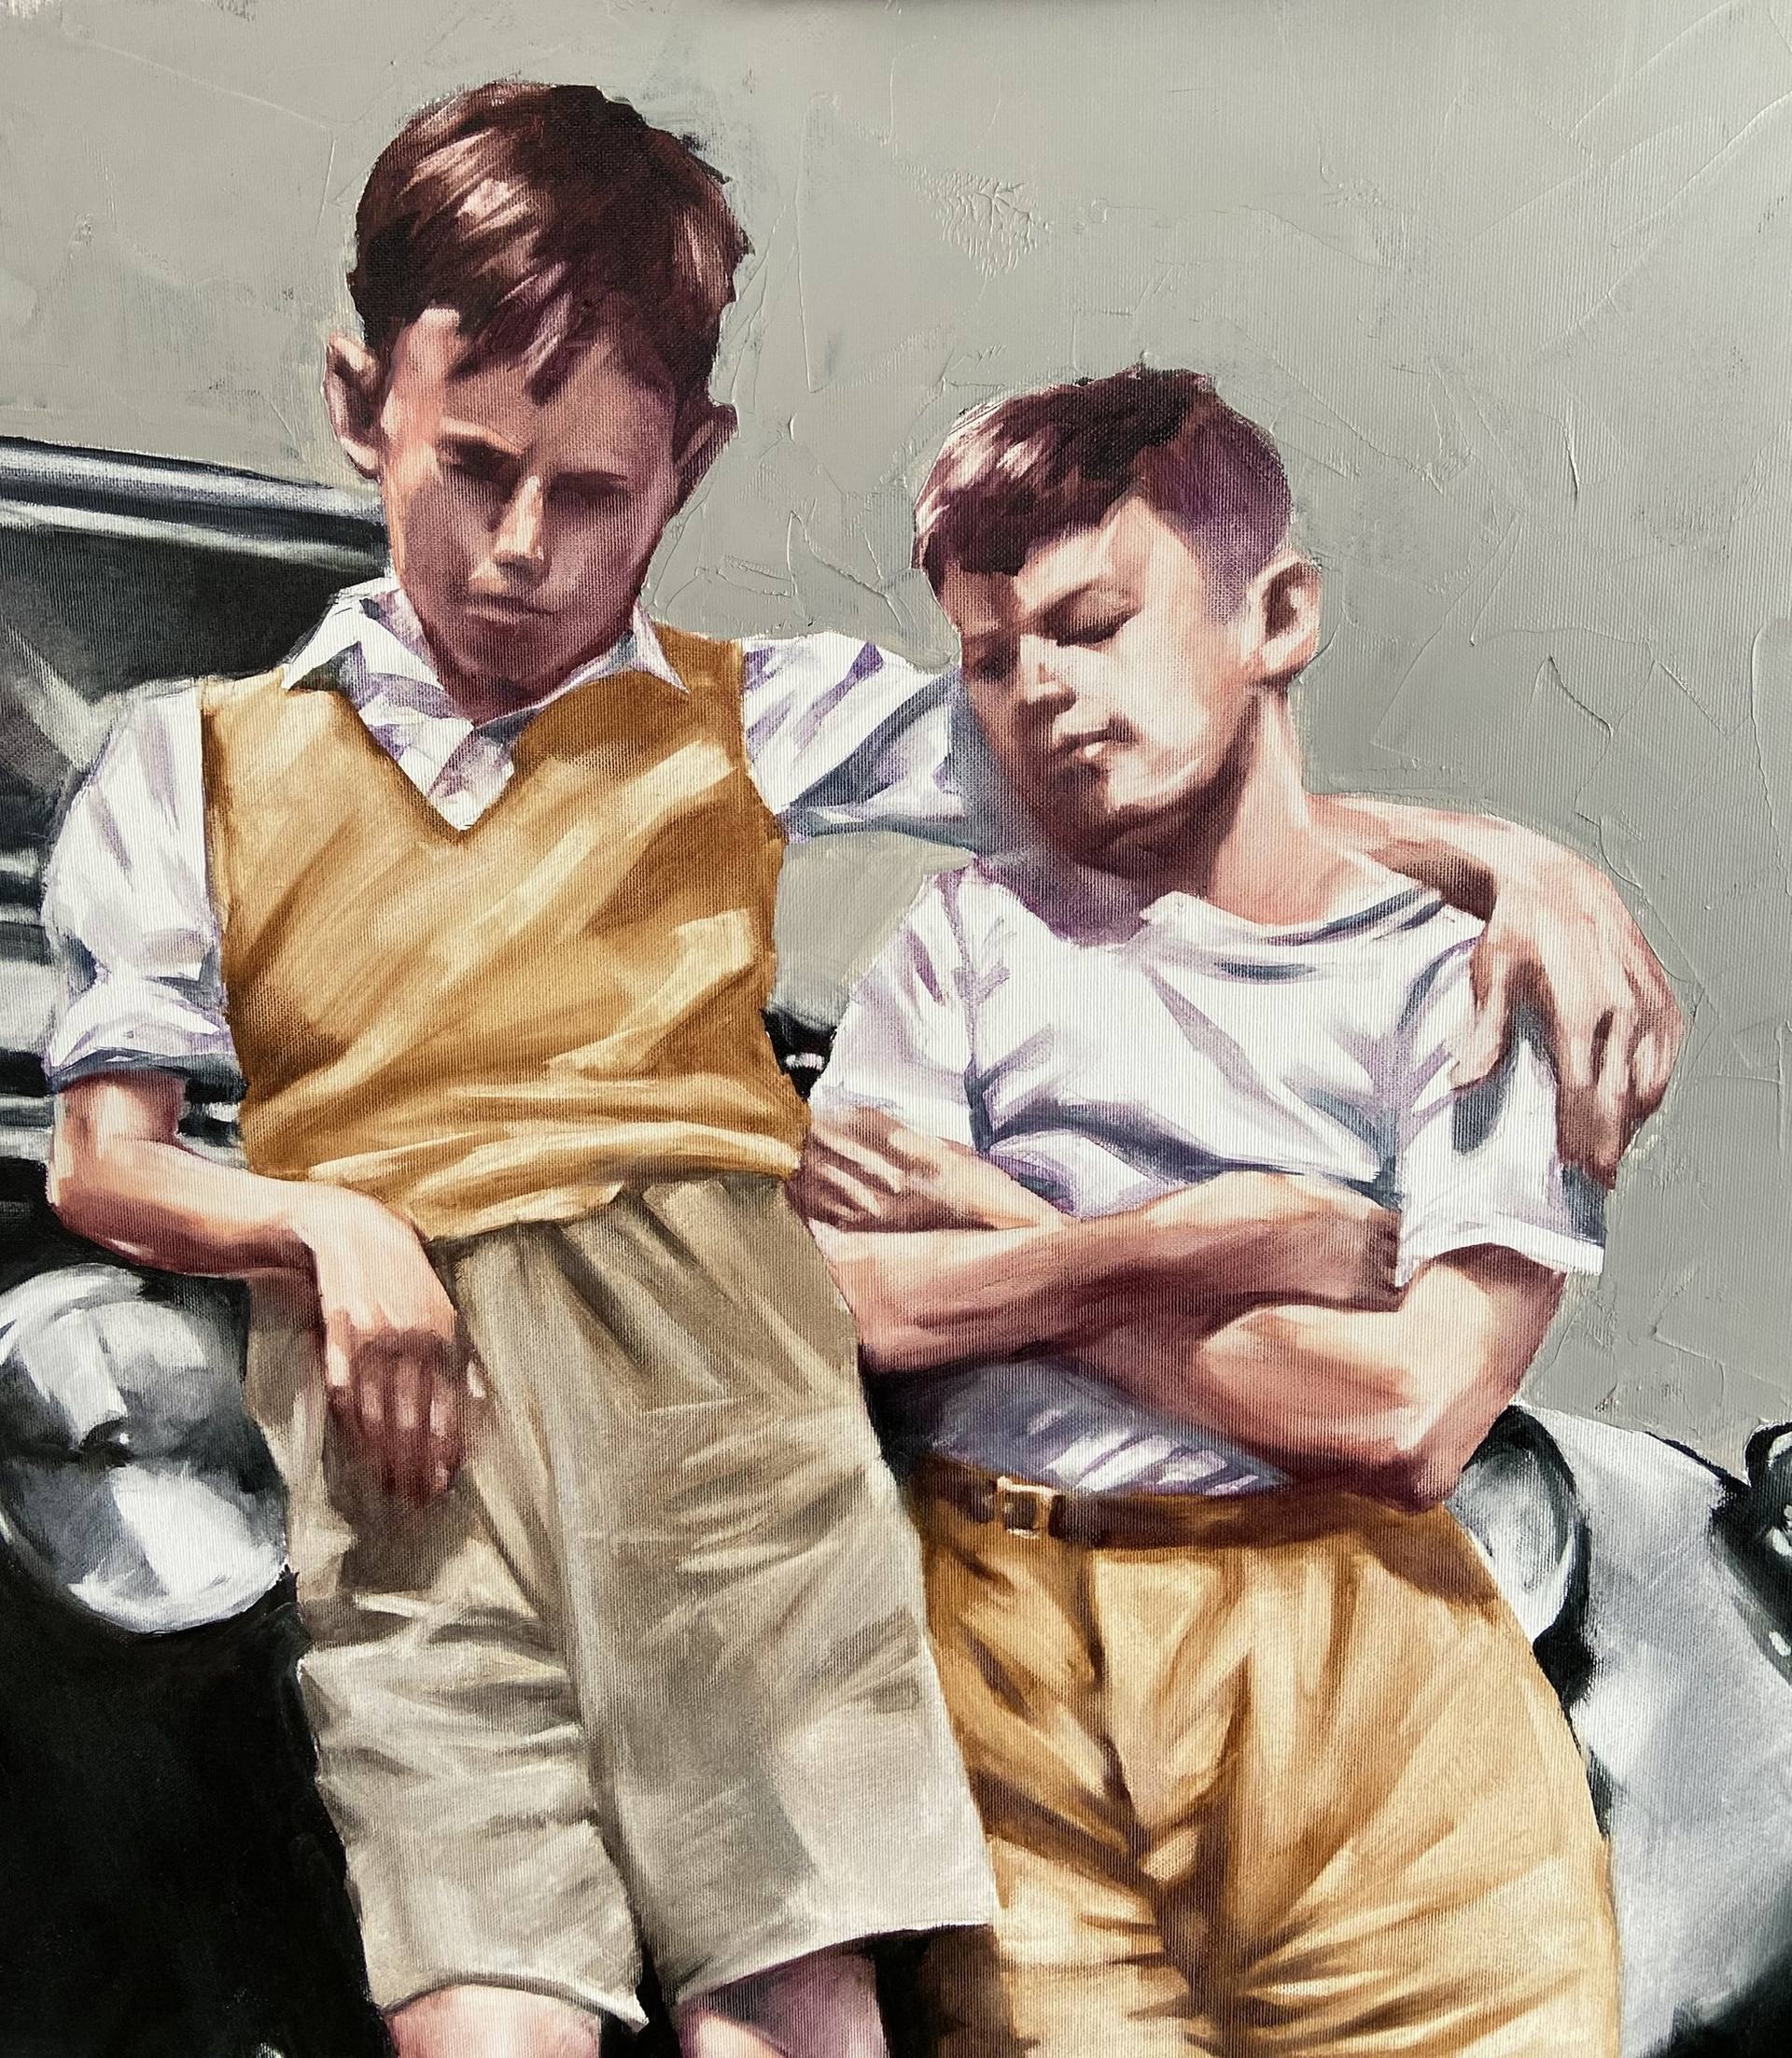 Brothers Oil Painting By Igor Shulman